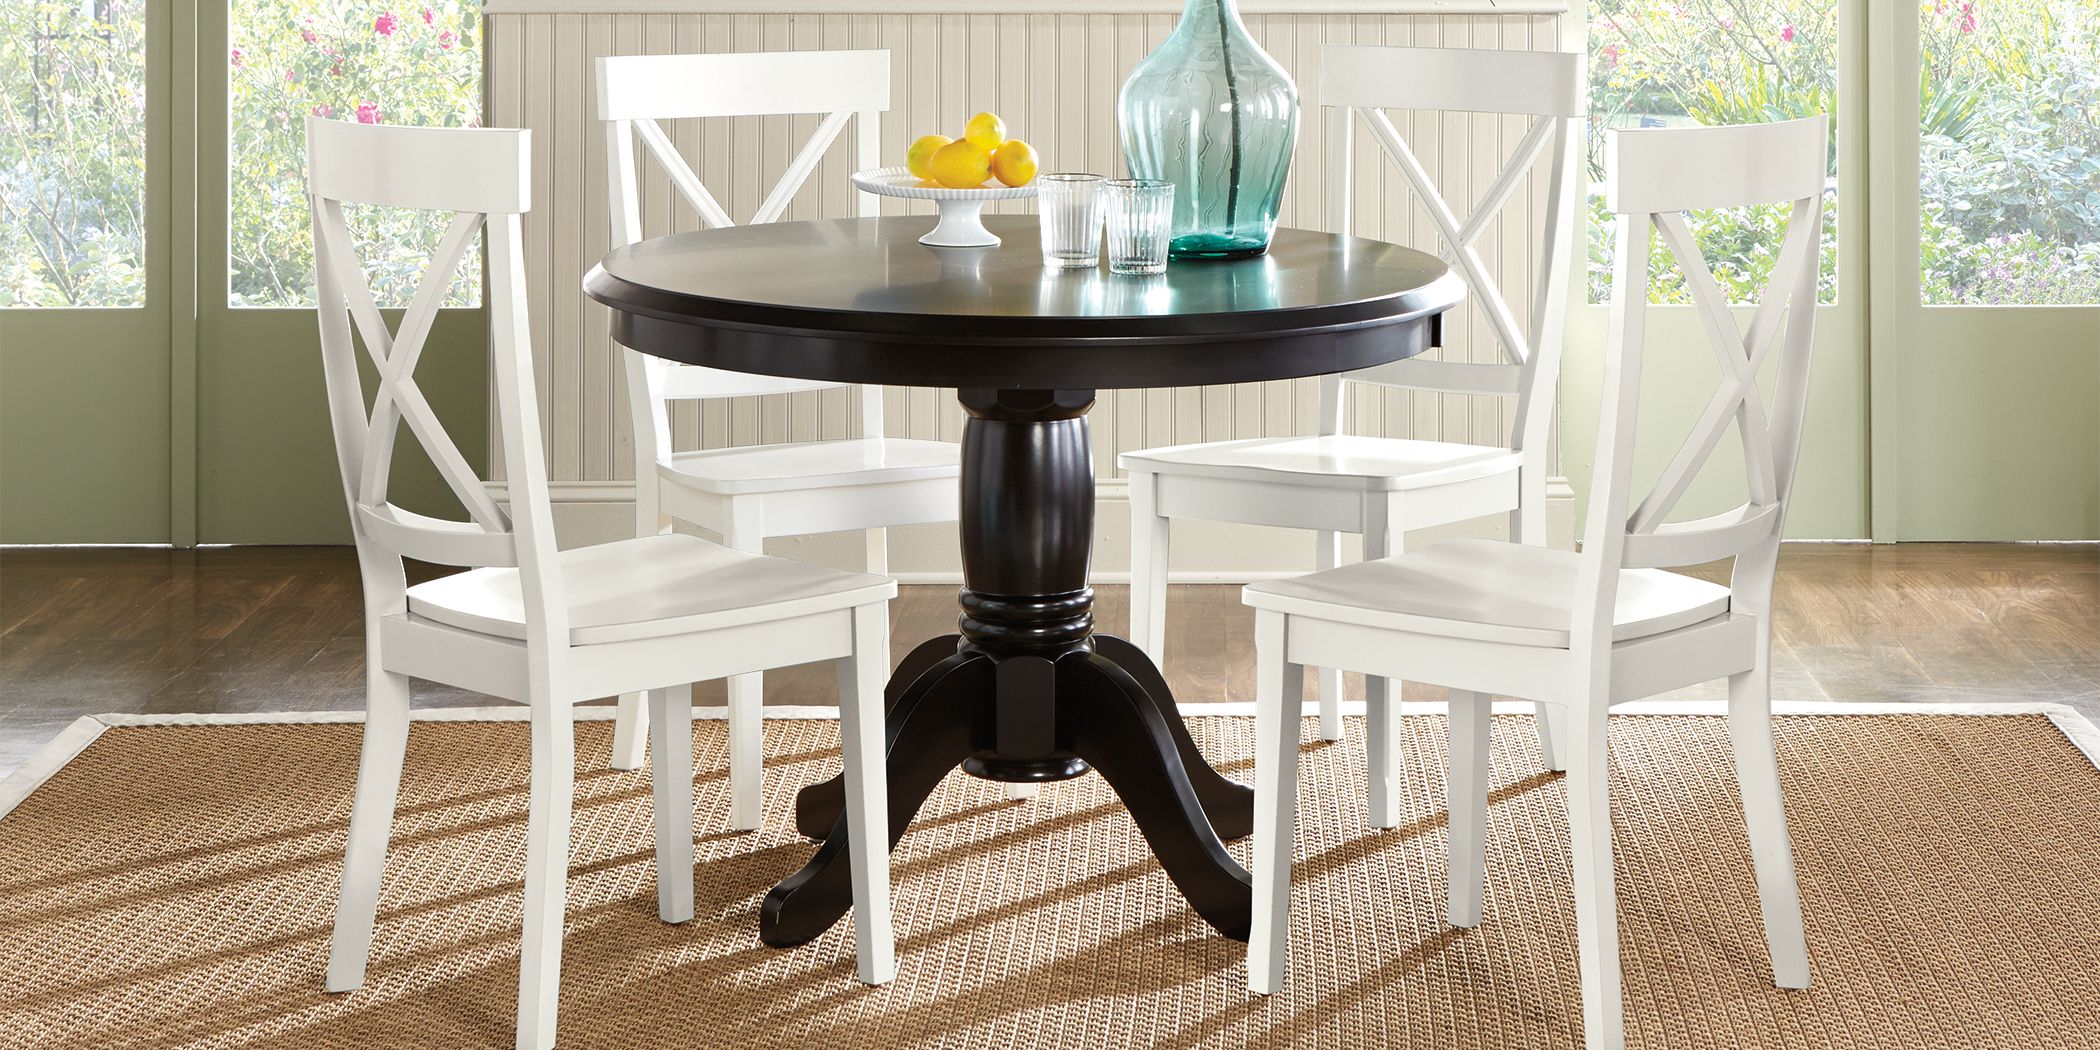 Black Dining Room Table Sets For, Kitchen Table And Chairs Black White